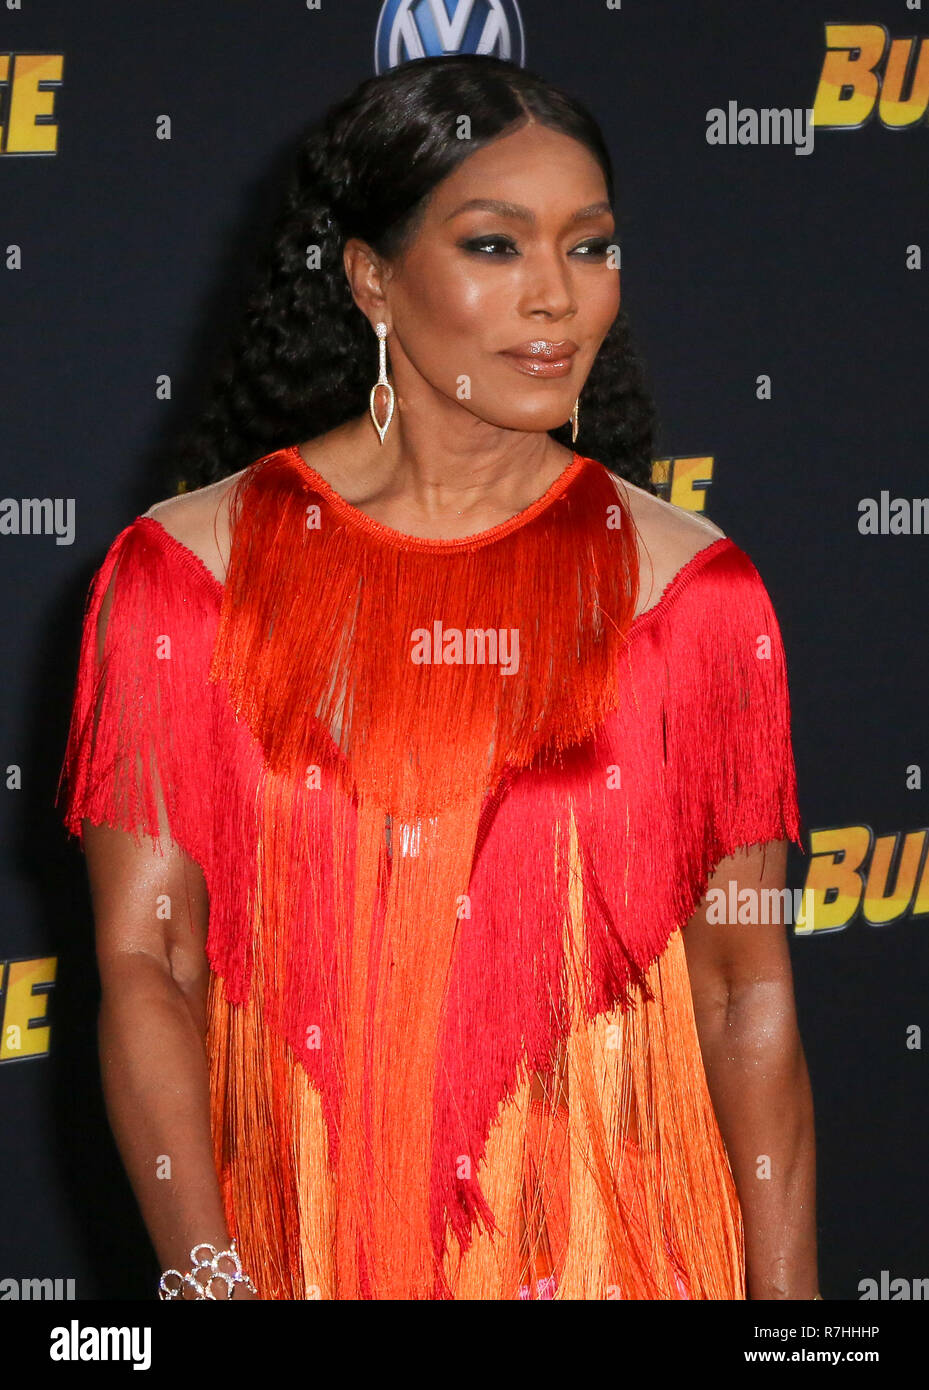 Hollywood, California, USA. 9th Dec, 2018. December 9, 2018 - Hollywood, California, U.S. - ANGELA BASSETT poses upon arrival for the Global Premiere of 'BUMBLEBEE' presented by Paramount Pictures at The Chinese Theatre. Credit: Alexander Seyum/ZUMA Wire/Alamy Live News Stock Photo